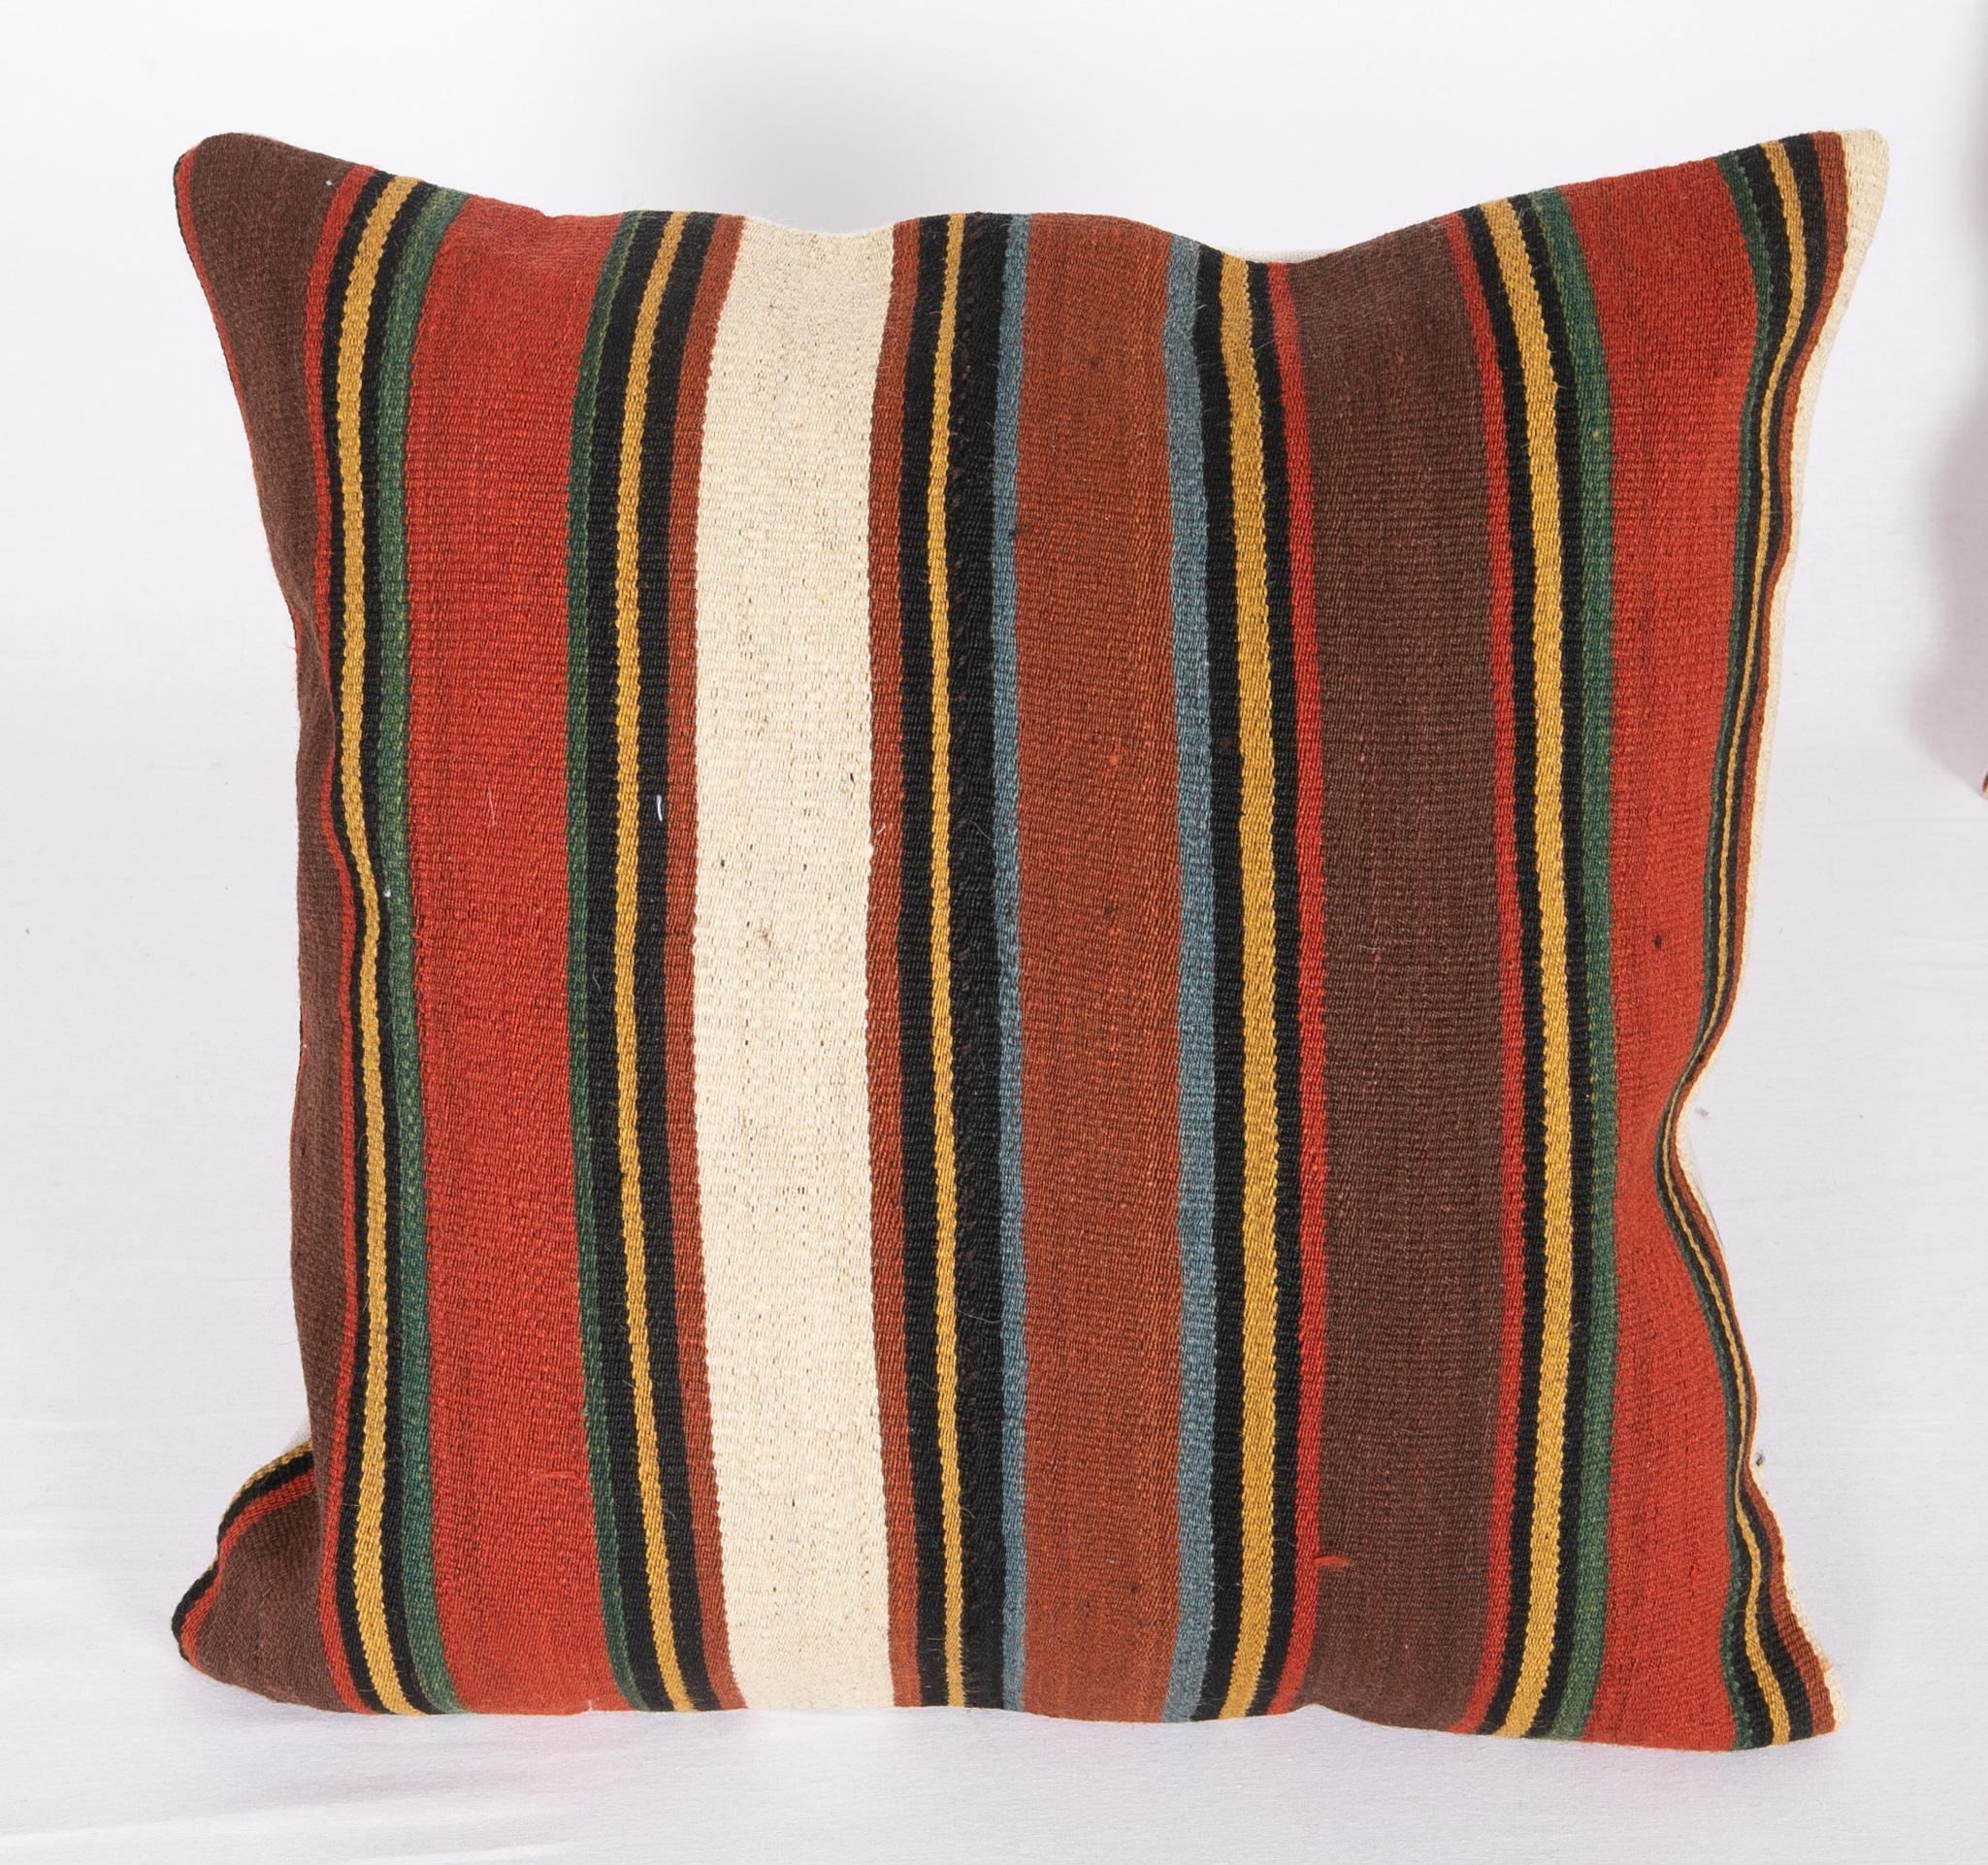 Hand-Woven Antique Pillow Cases Made from a South Caucasian Kilim, Late 19th C